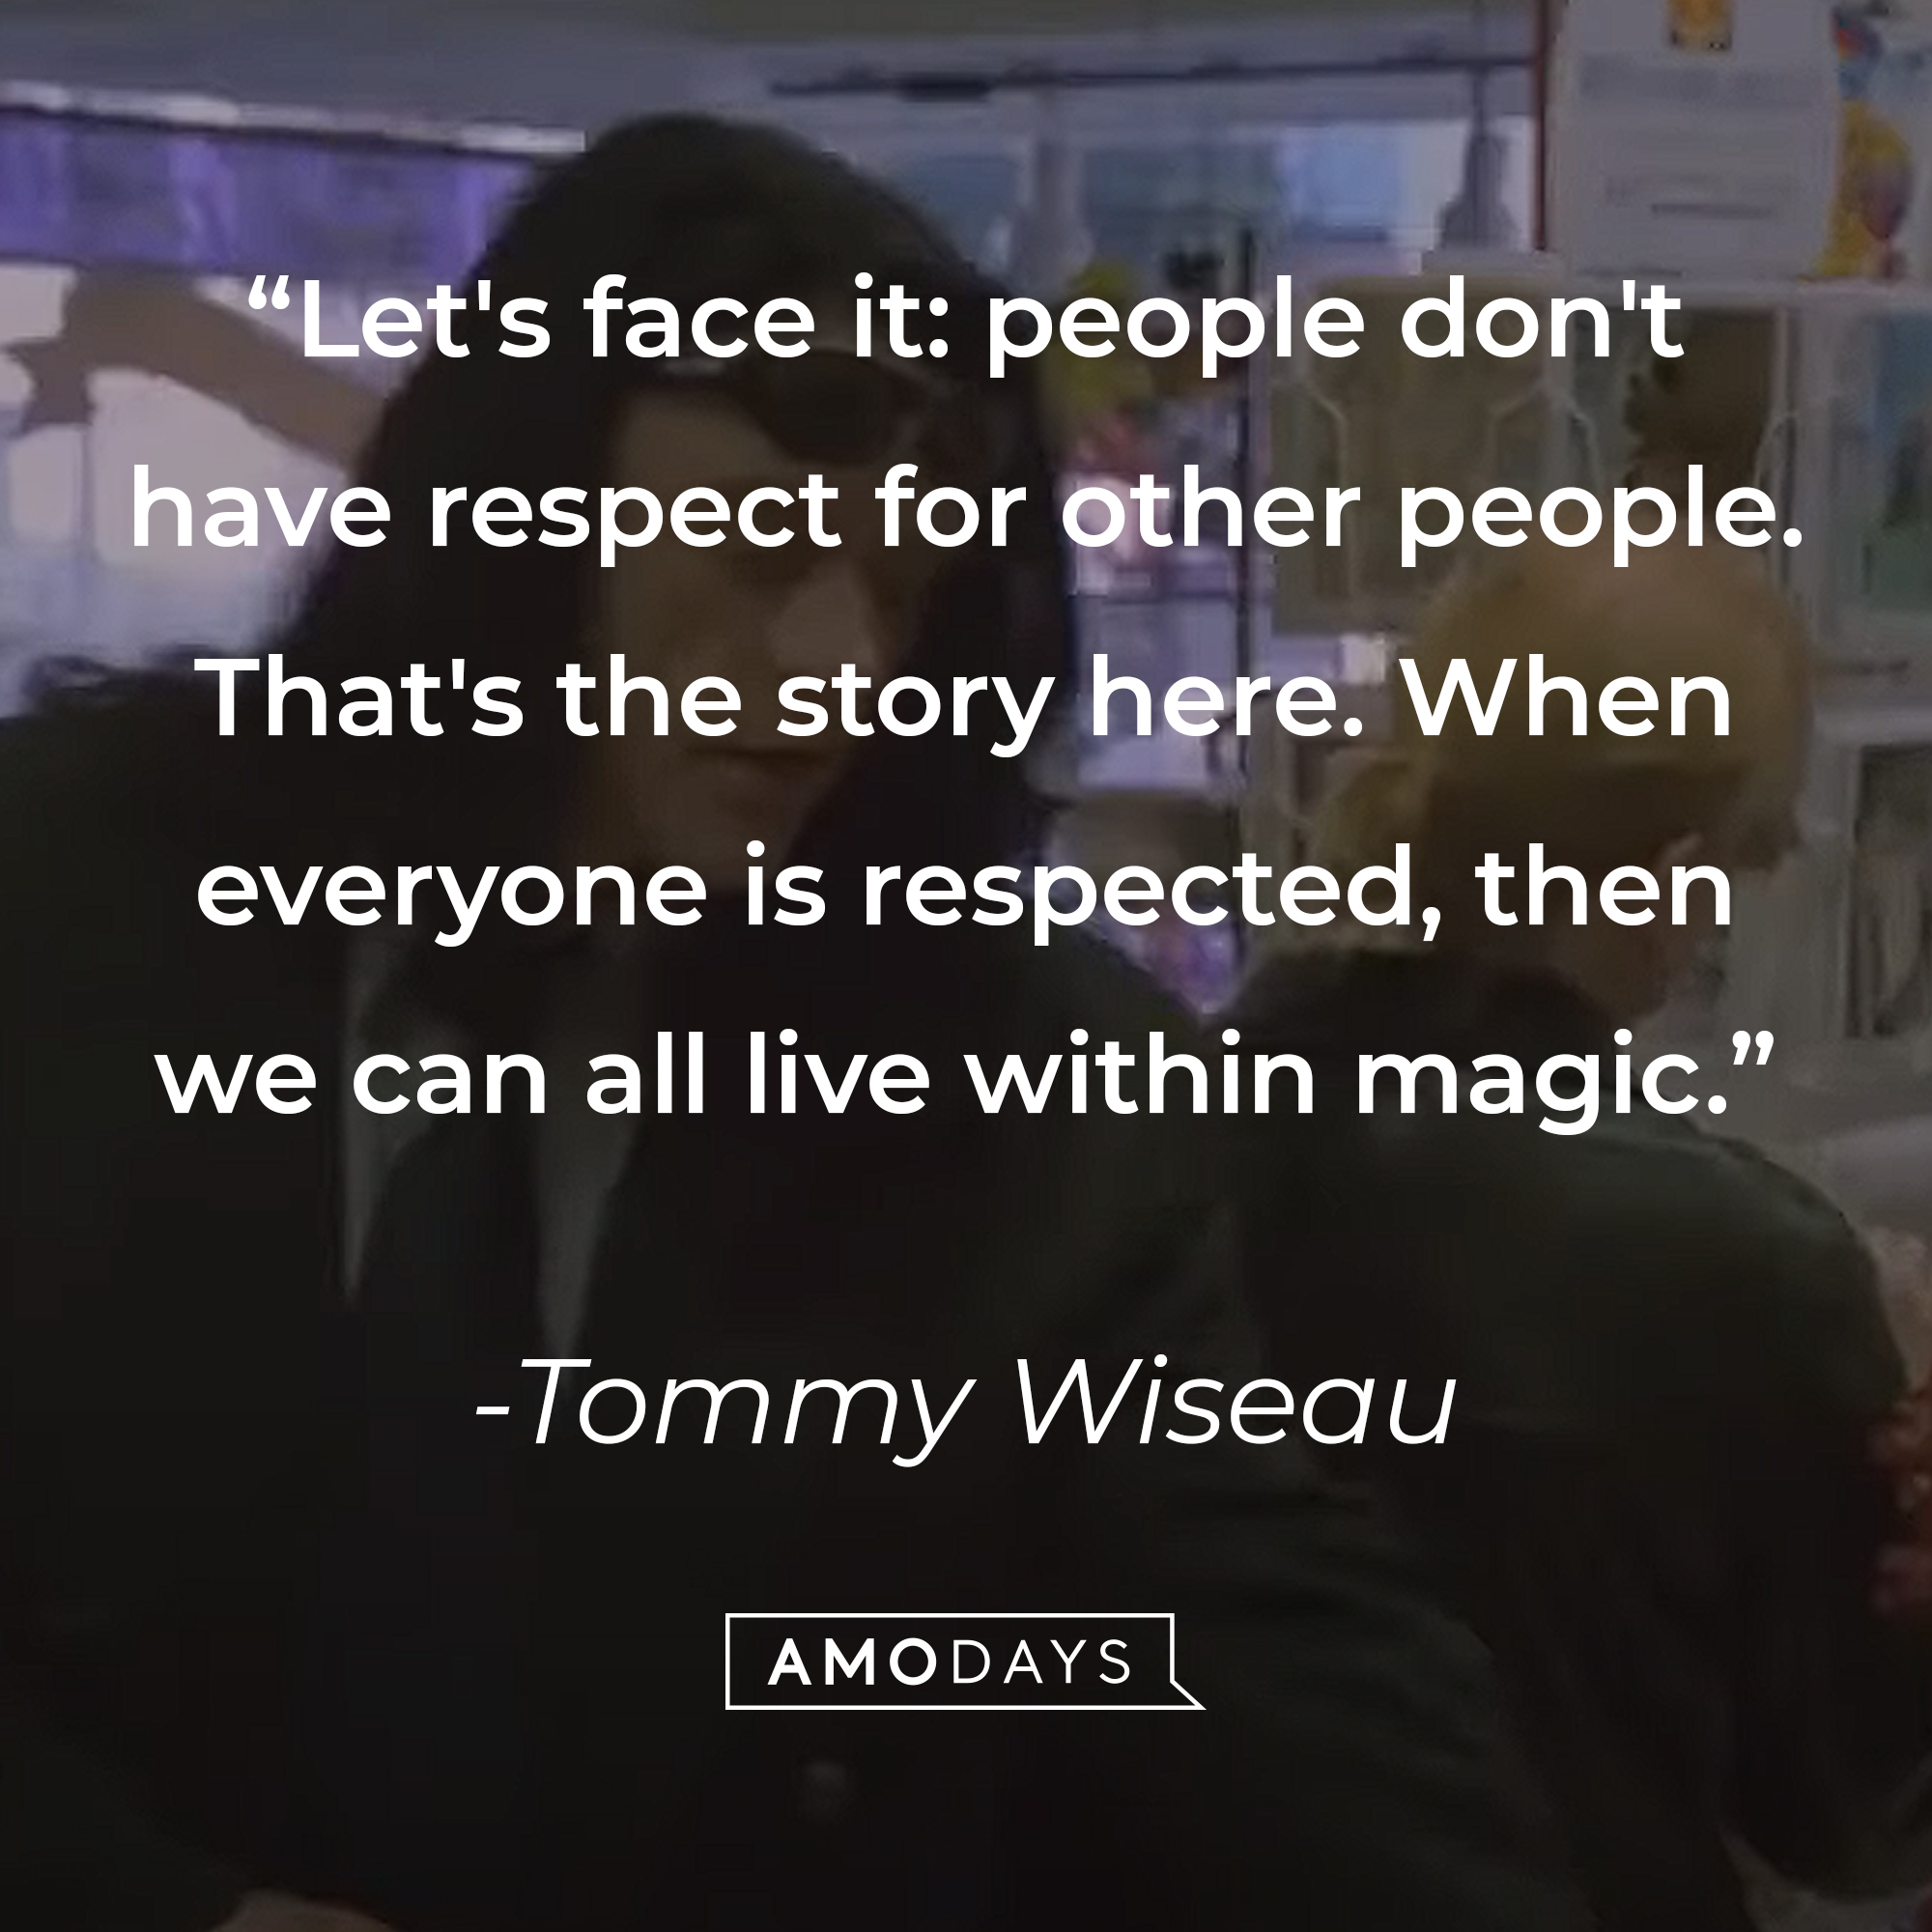 A photo of from "The Room" with the quote, ""Let's face it: people don't have respect for other people. That's the story here. When everyone is respected, then we can all live within magic." | Source: YouTube/TommyWiseau